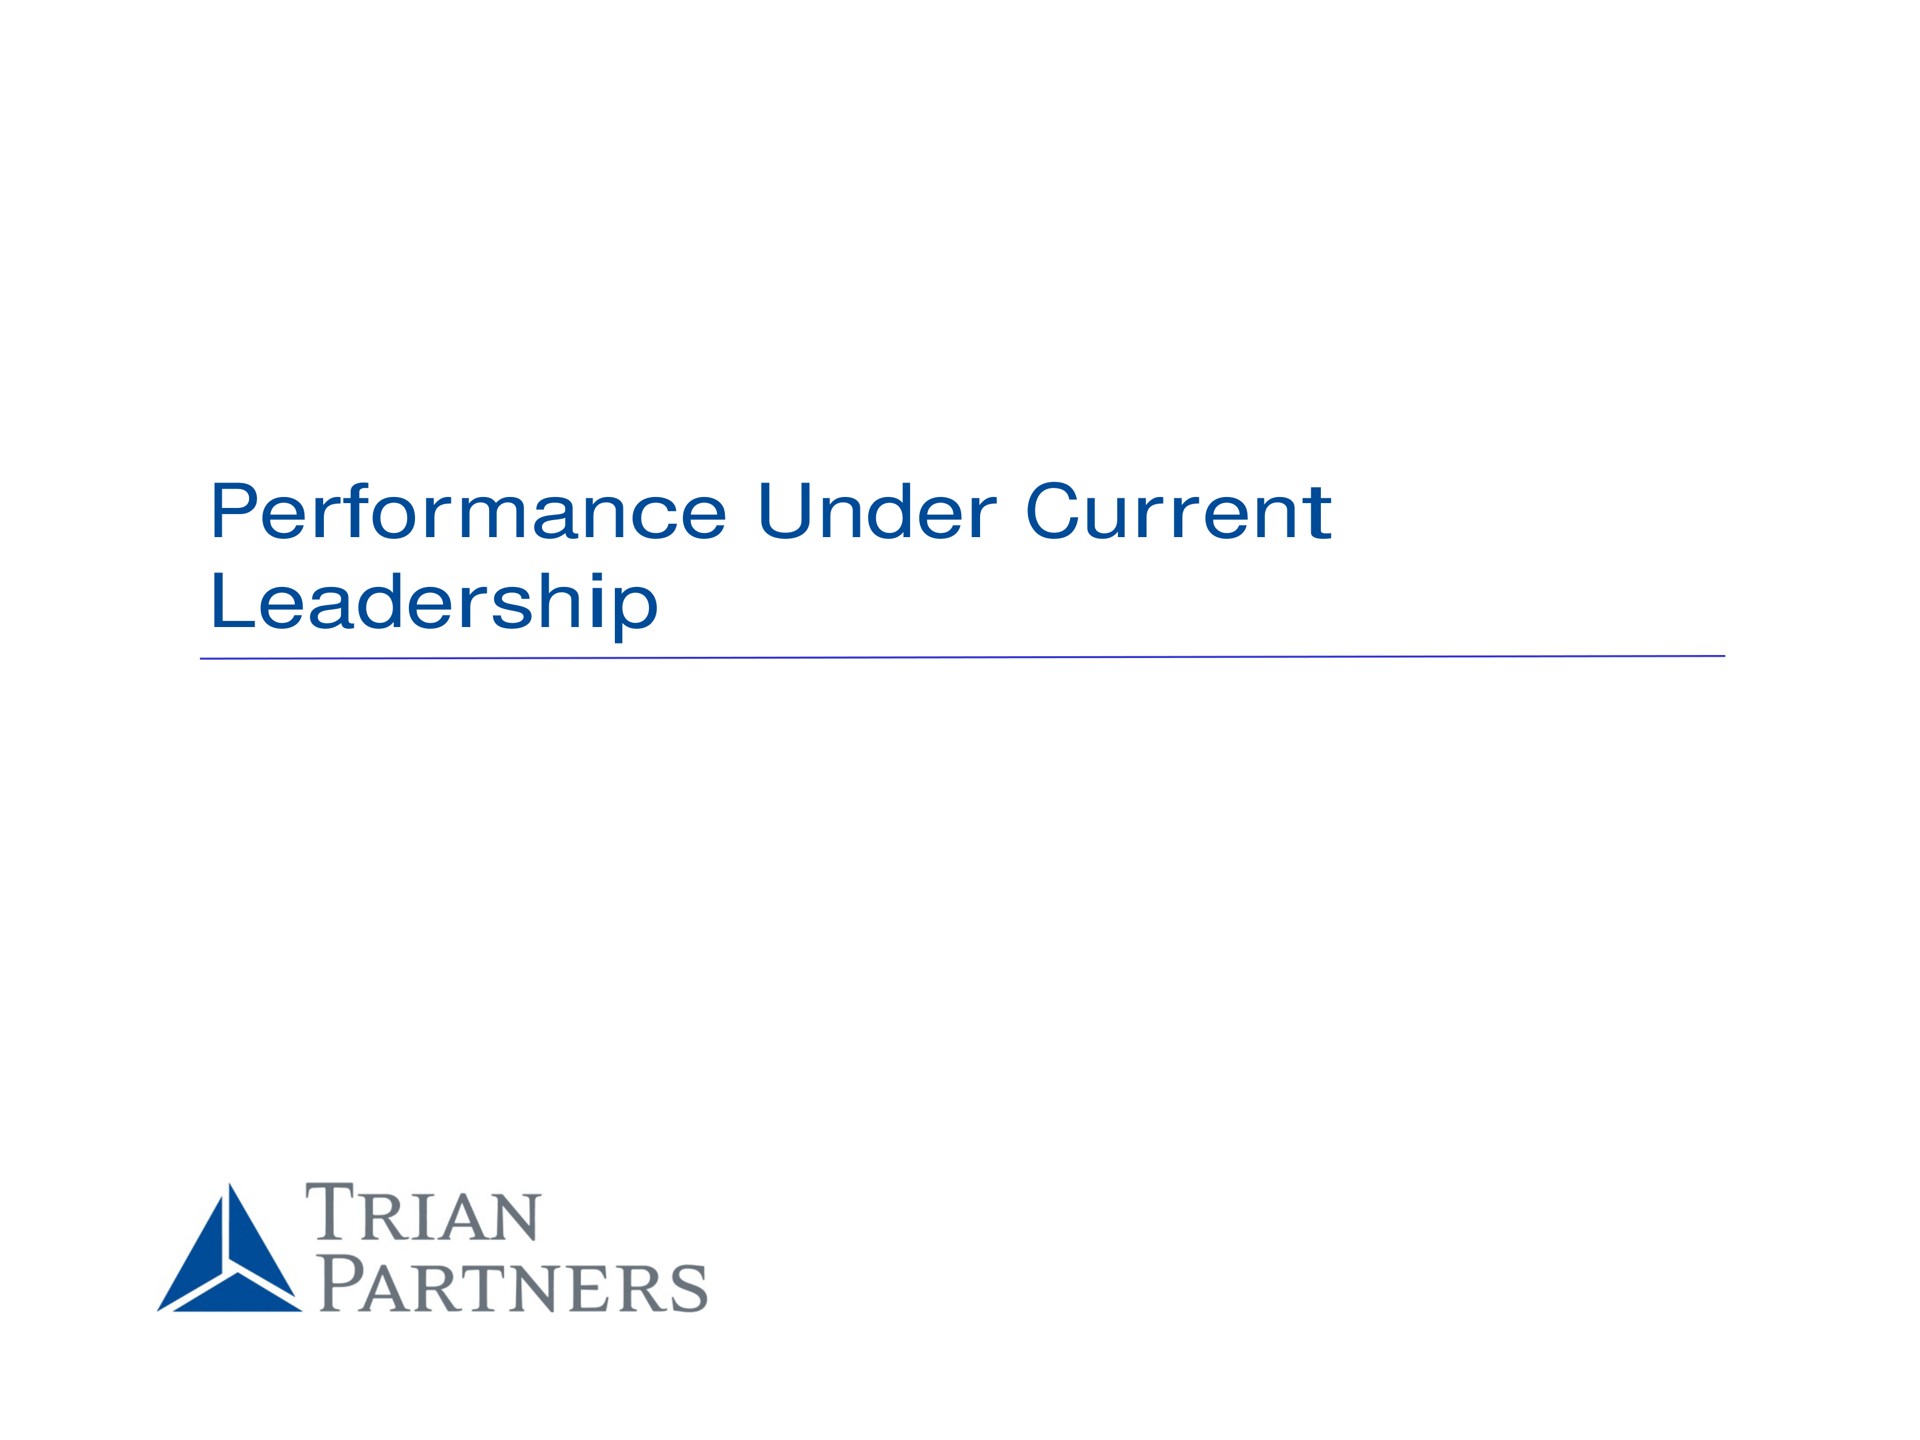 performance under current leadership partners | Trian Partners